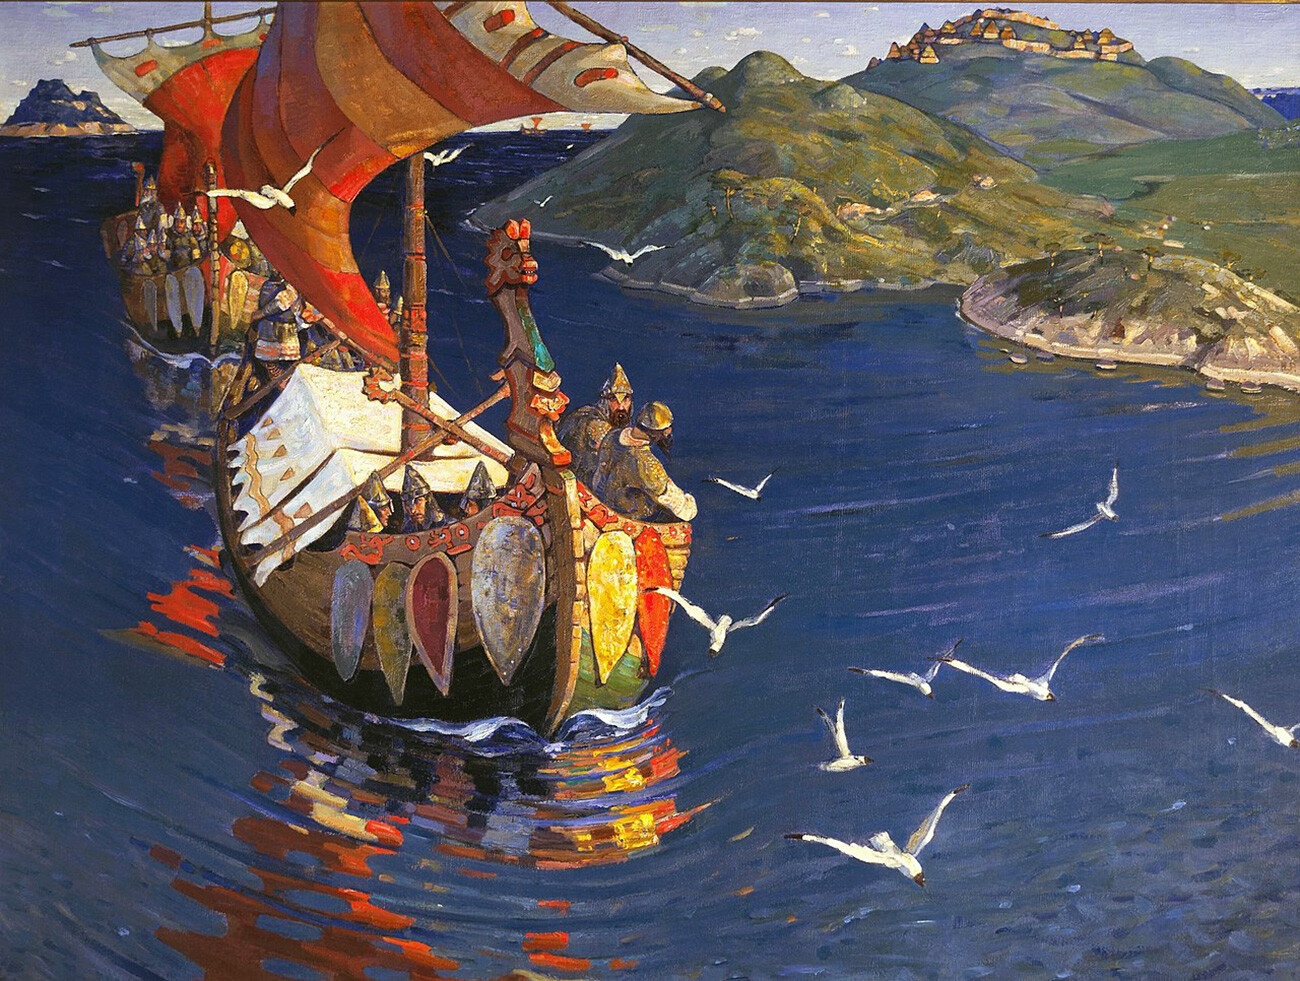 Guests from over the sea, Nikolai Rerikh, 1901